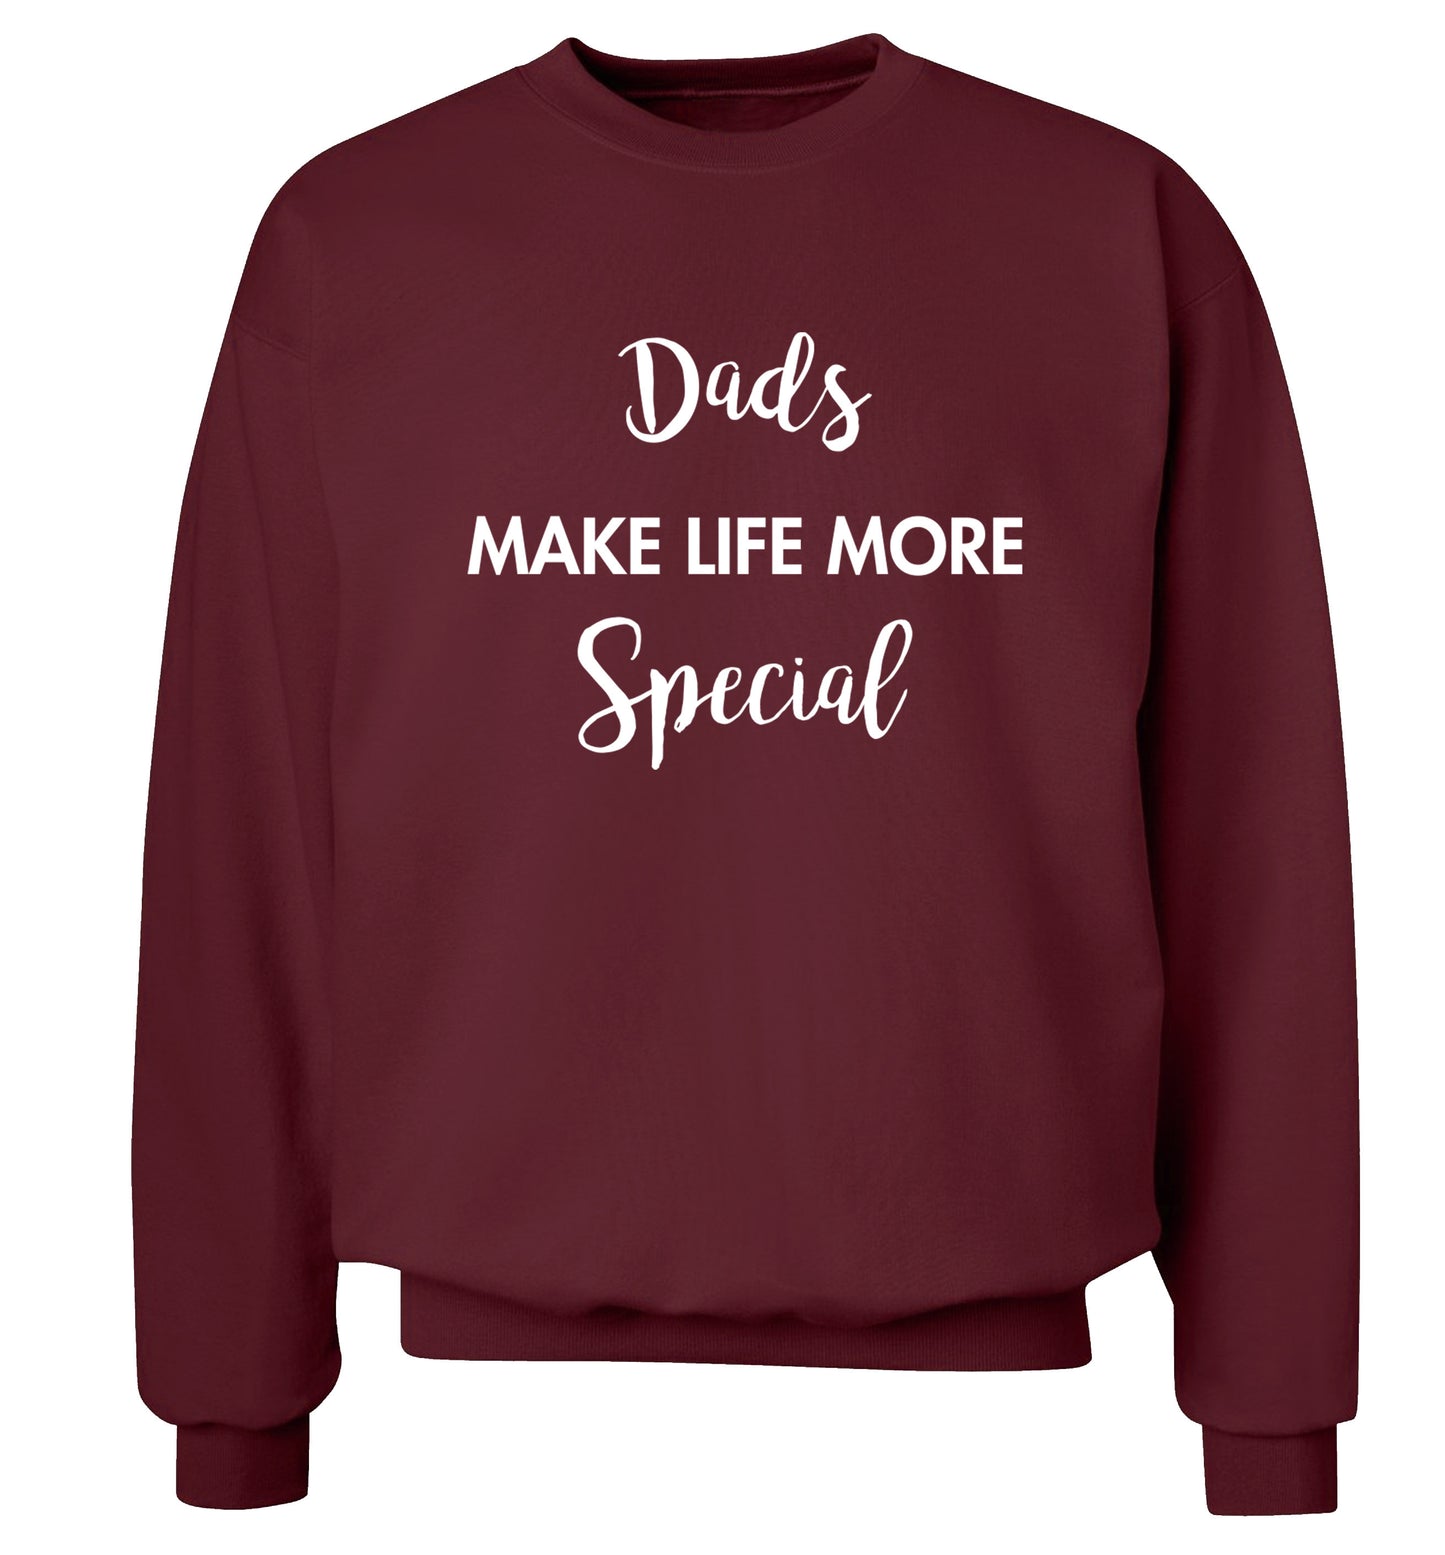 Dads make life more special Adult's unisex maroon Sweater 2XL